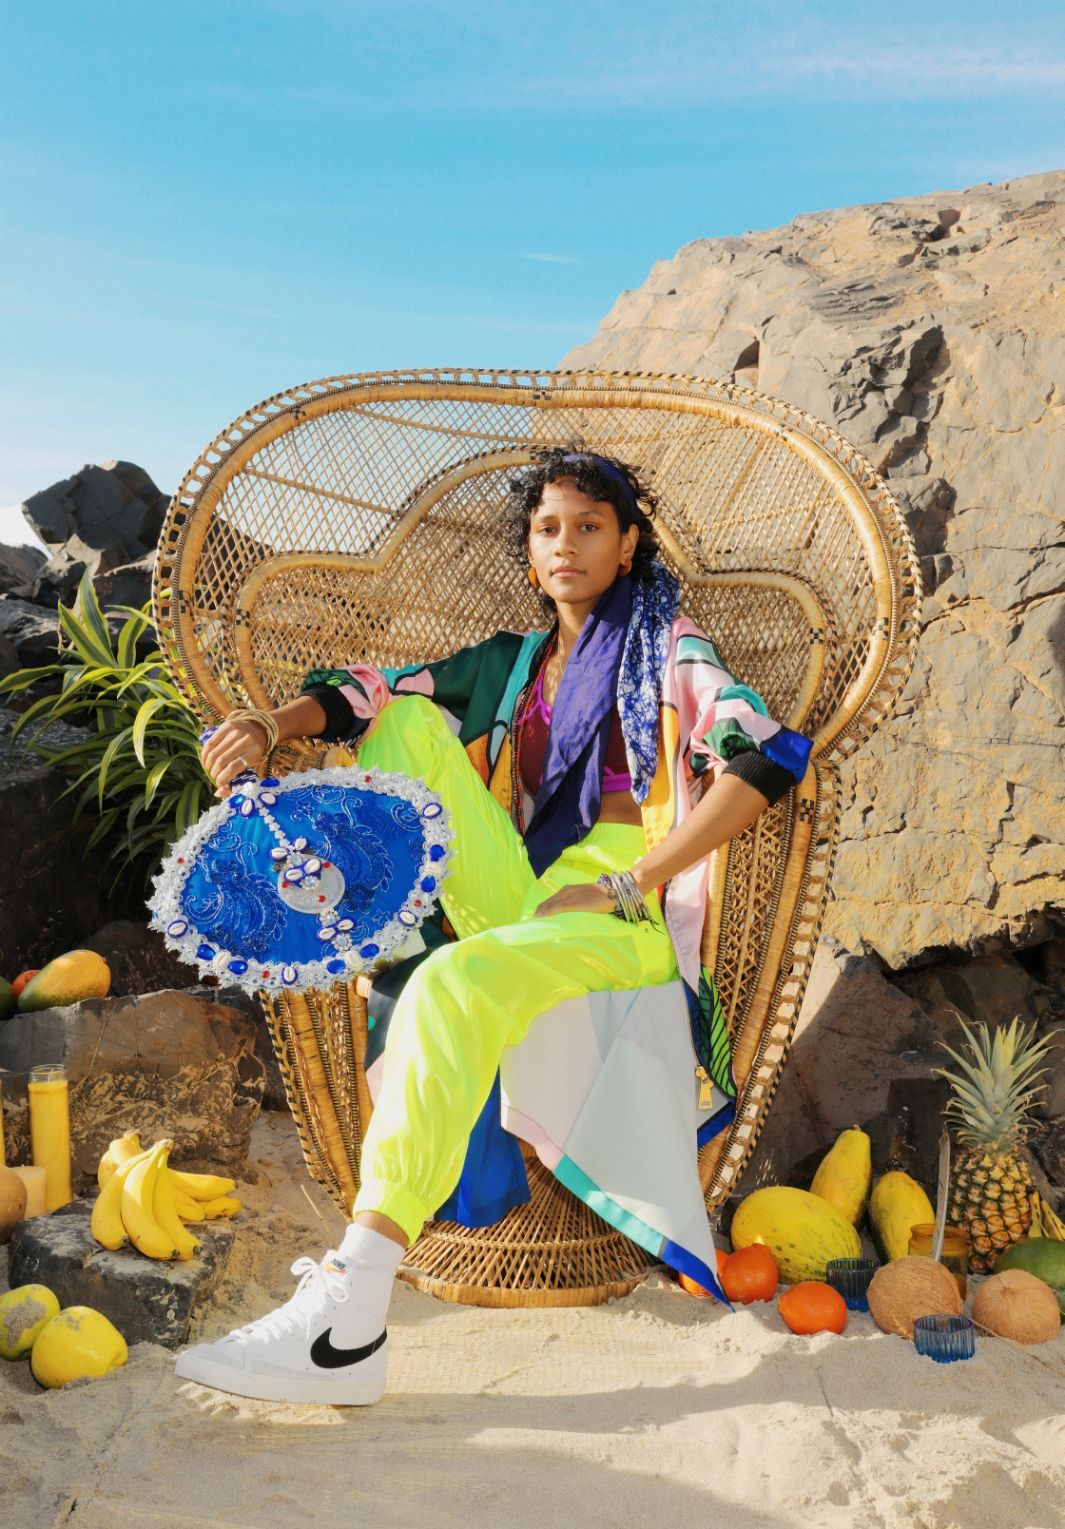 Djali Brown-Cepedain wicker chair on beach with colorful clothing. She is holding a decorated hand fan. There is fruit around the chair.